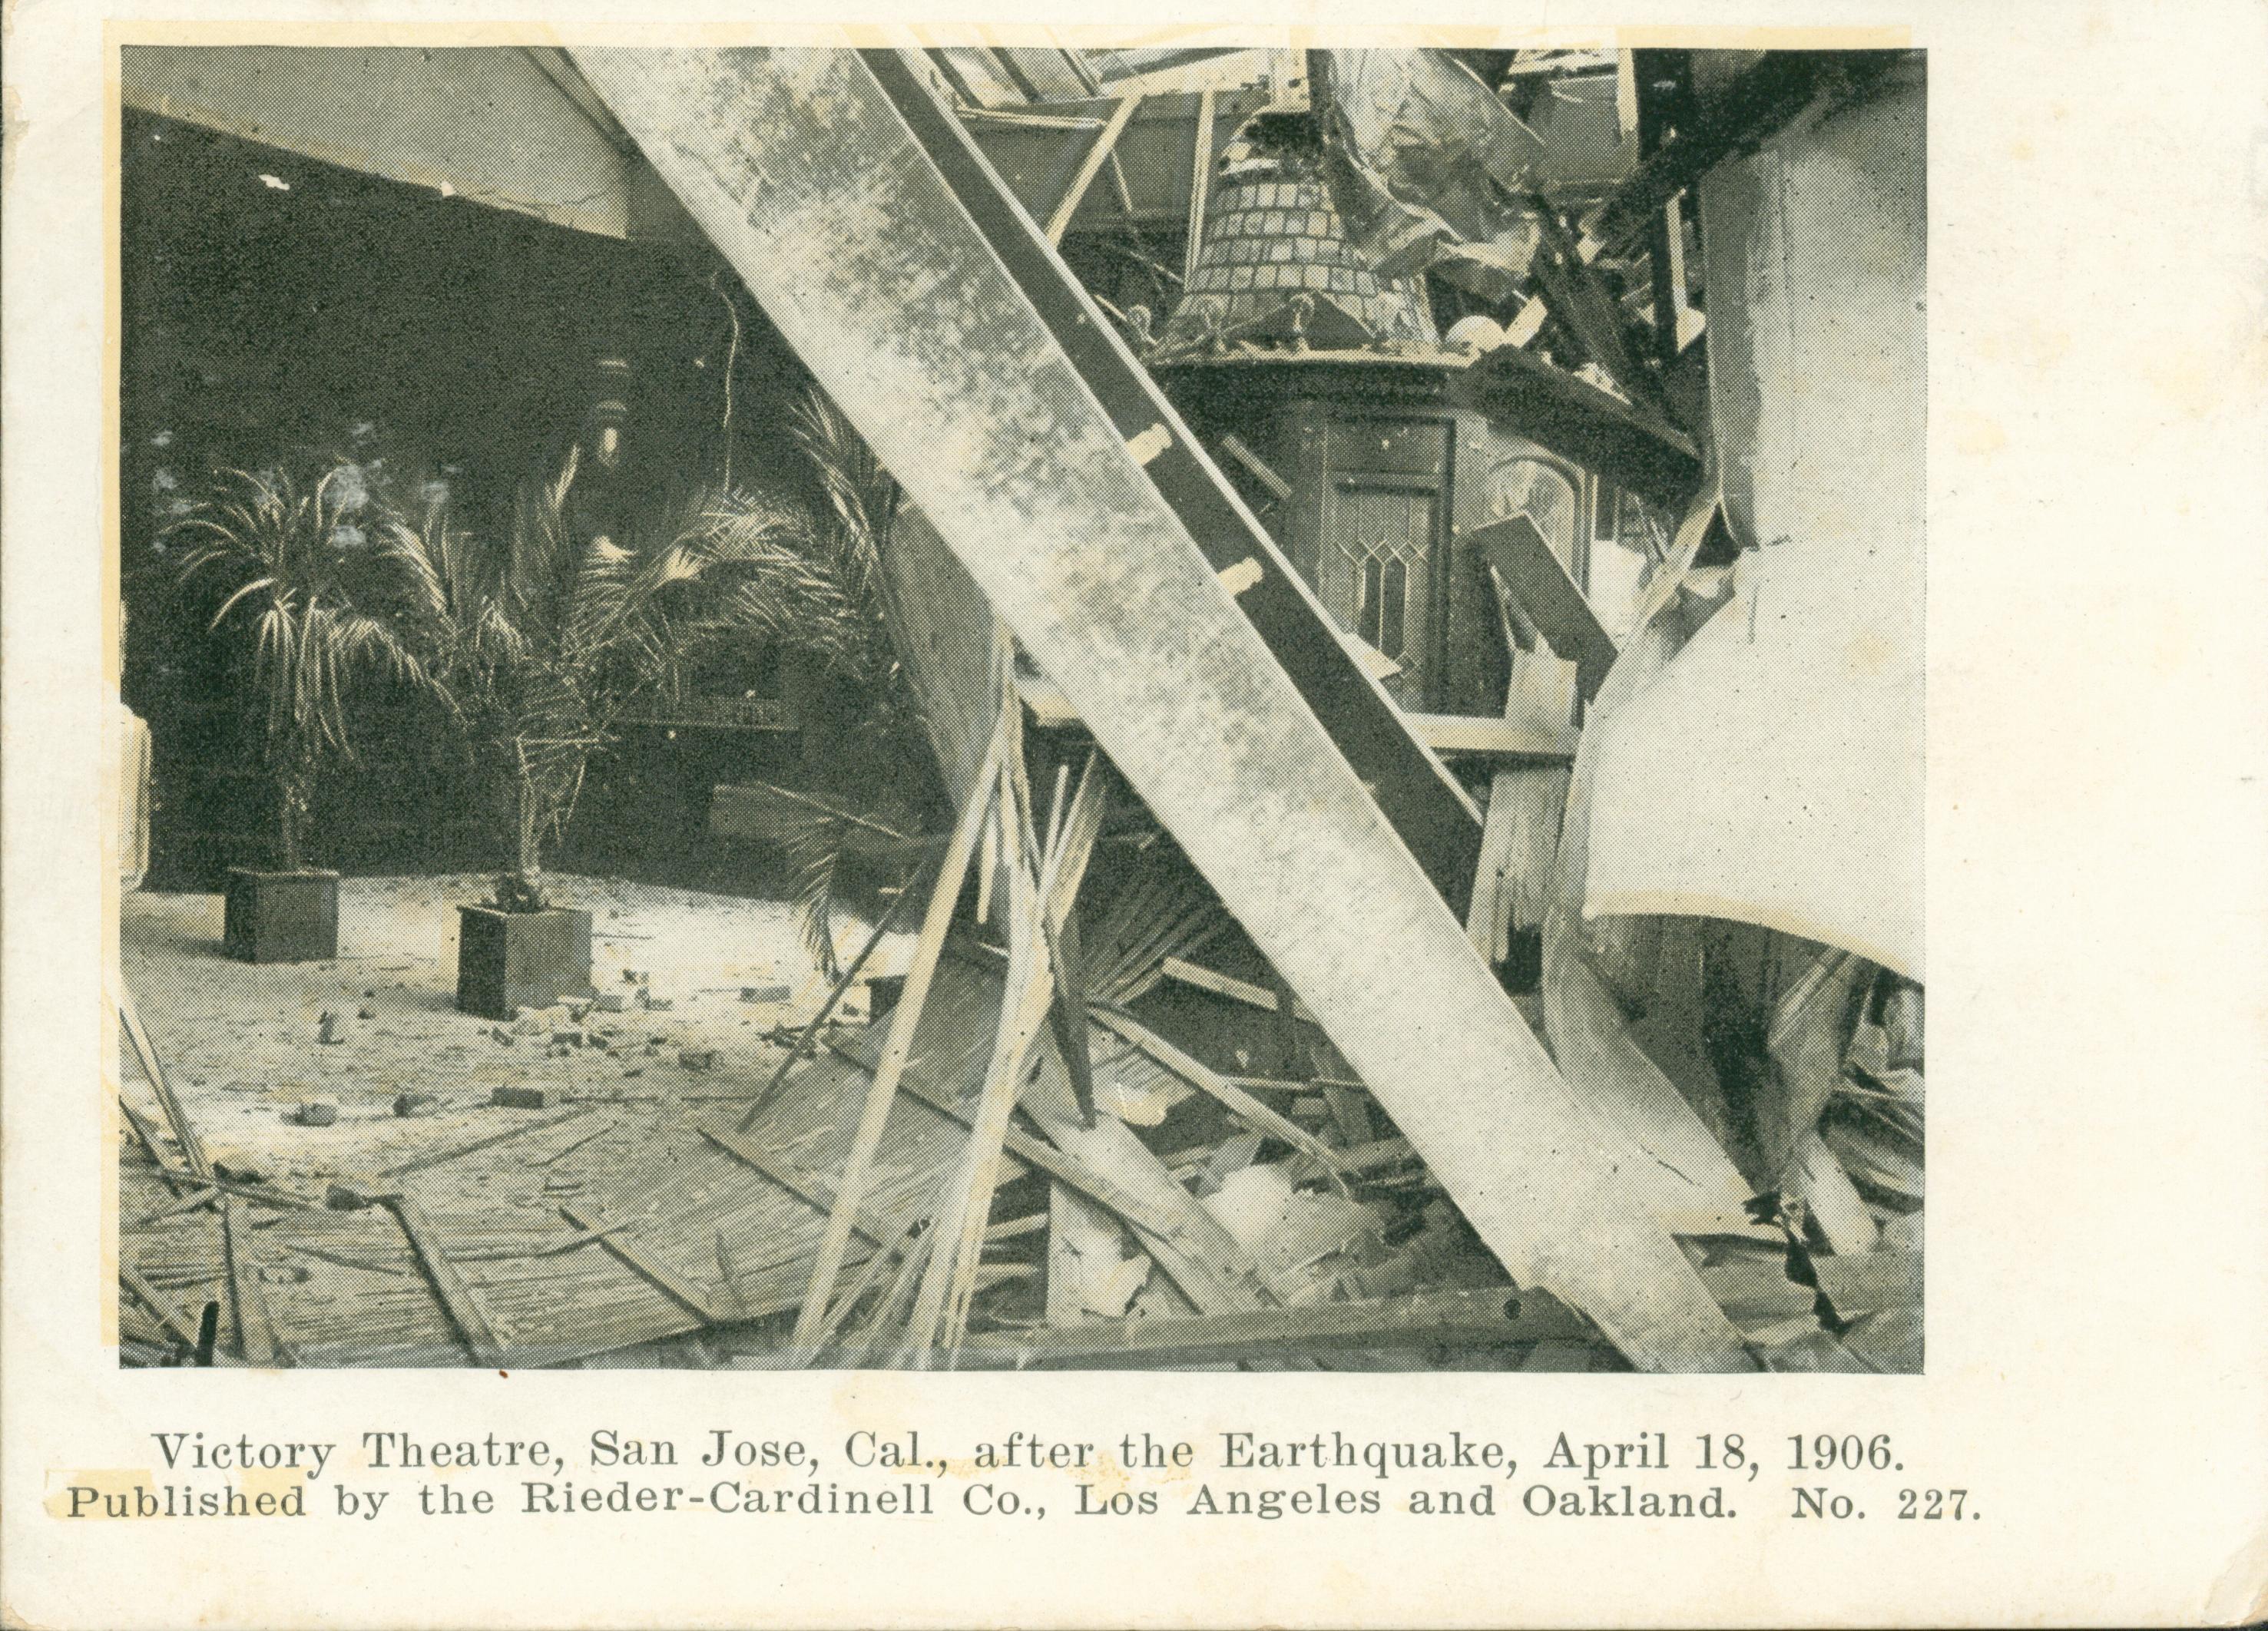 Interior view of Victory Theatre in San Jose showing the damage done by the 1906 earthquake